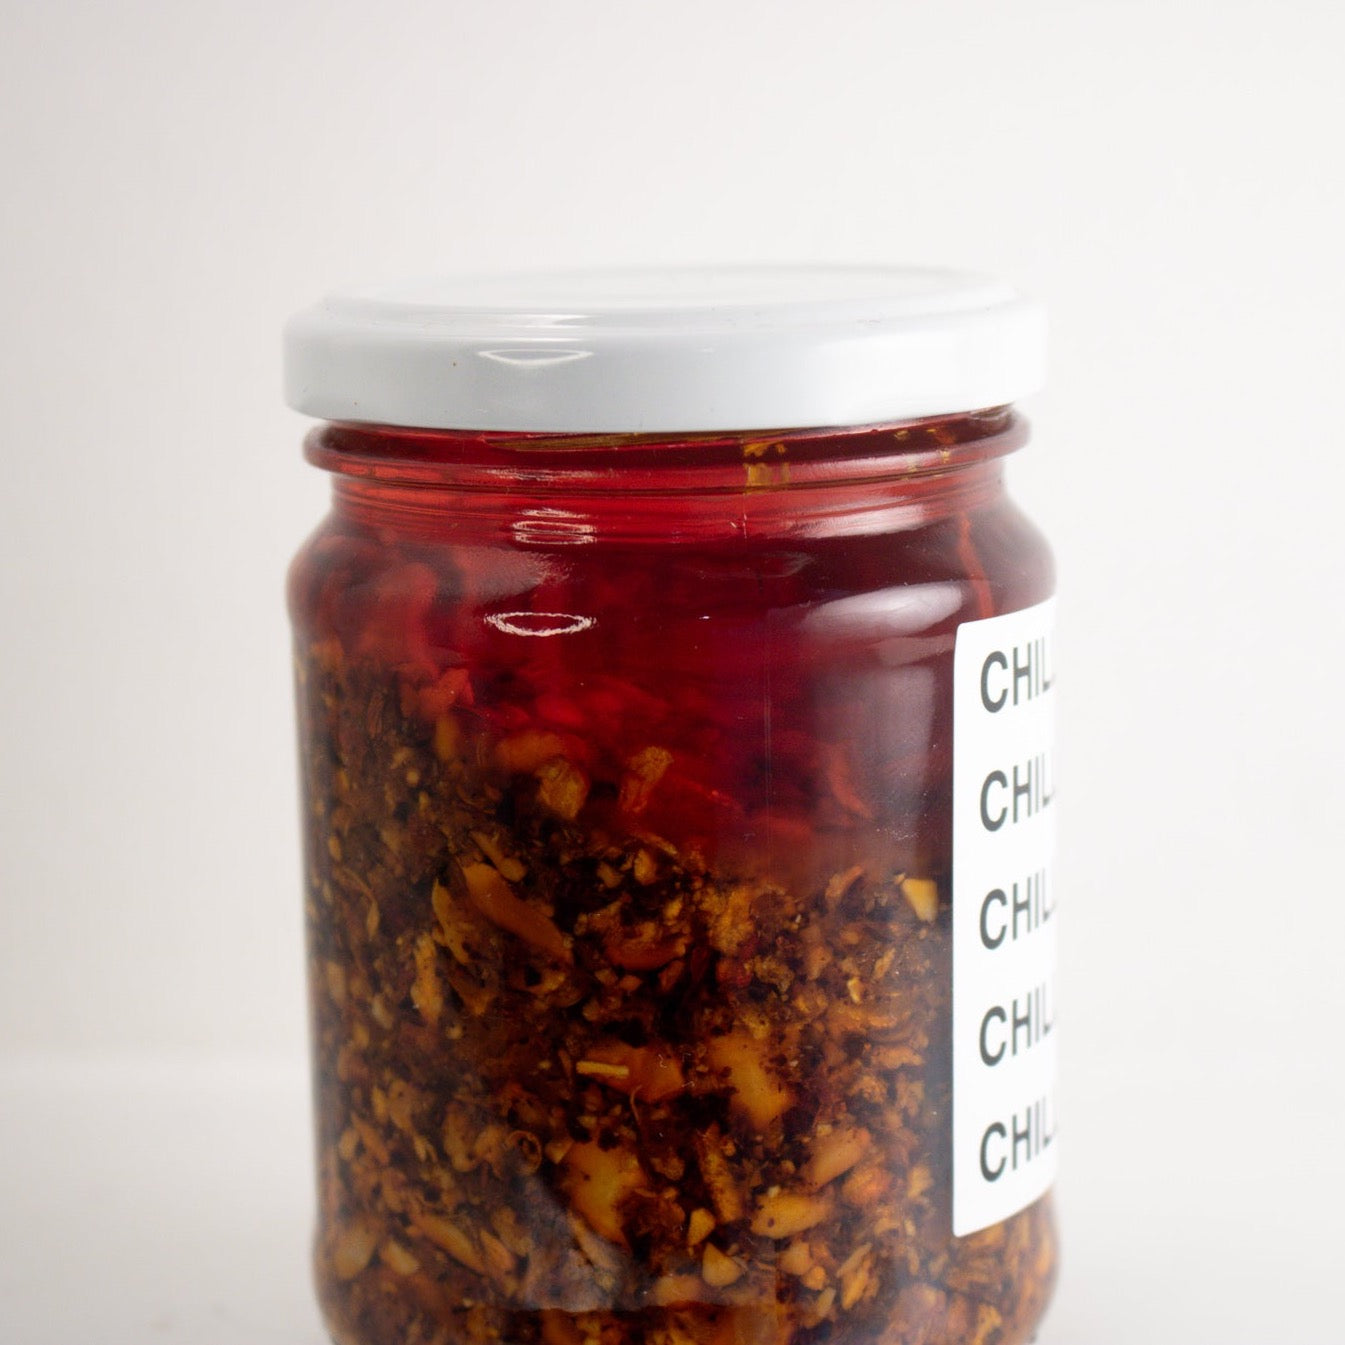 image of the side of the jar showing the peanut and red chilli oil ingredients